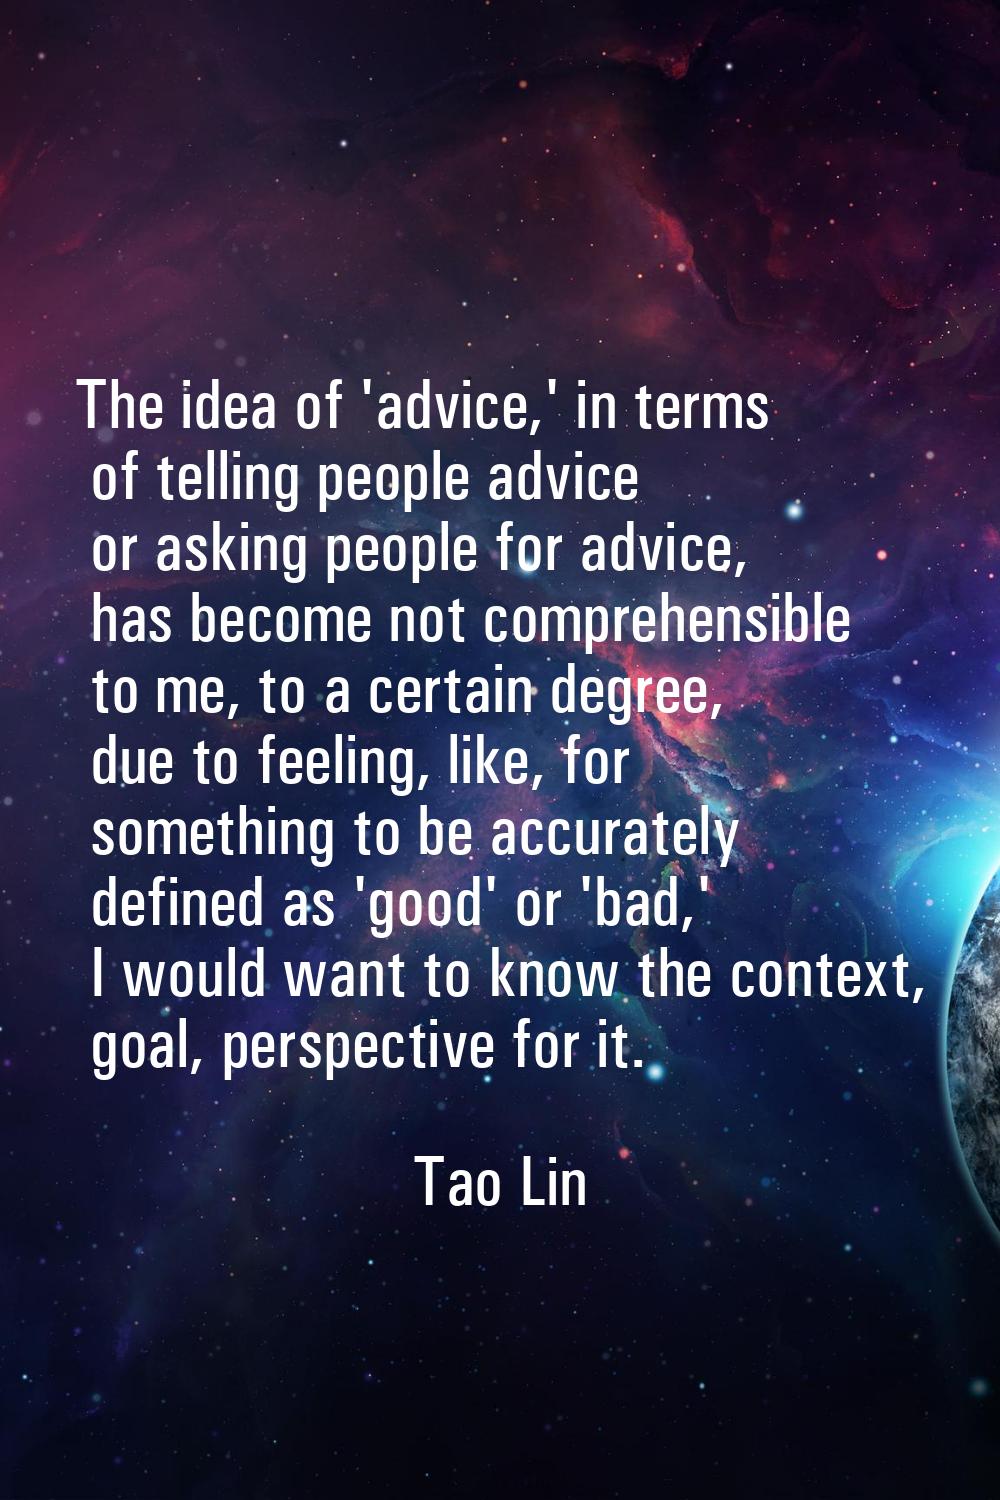 The idea of 'advice,' in terms of telling people advice or asking people for advice, has become not